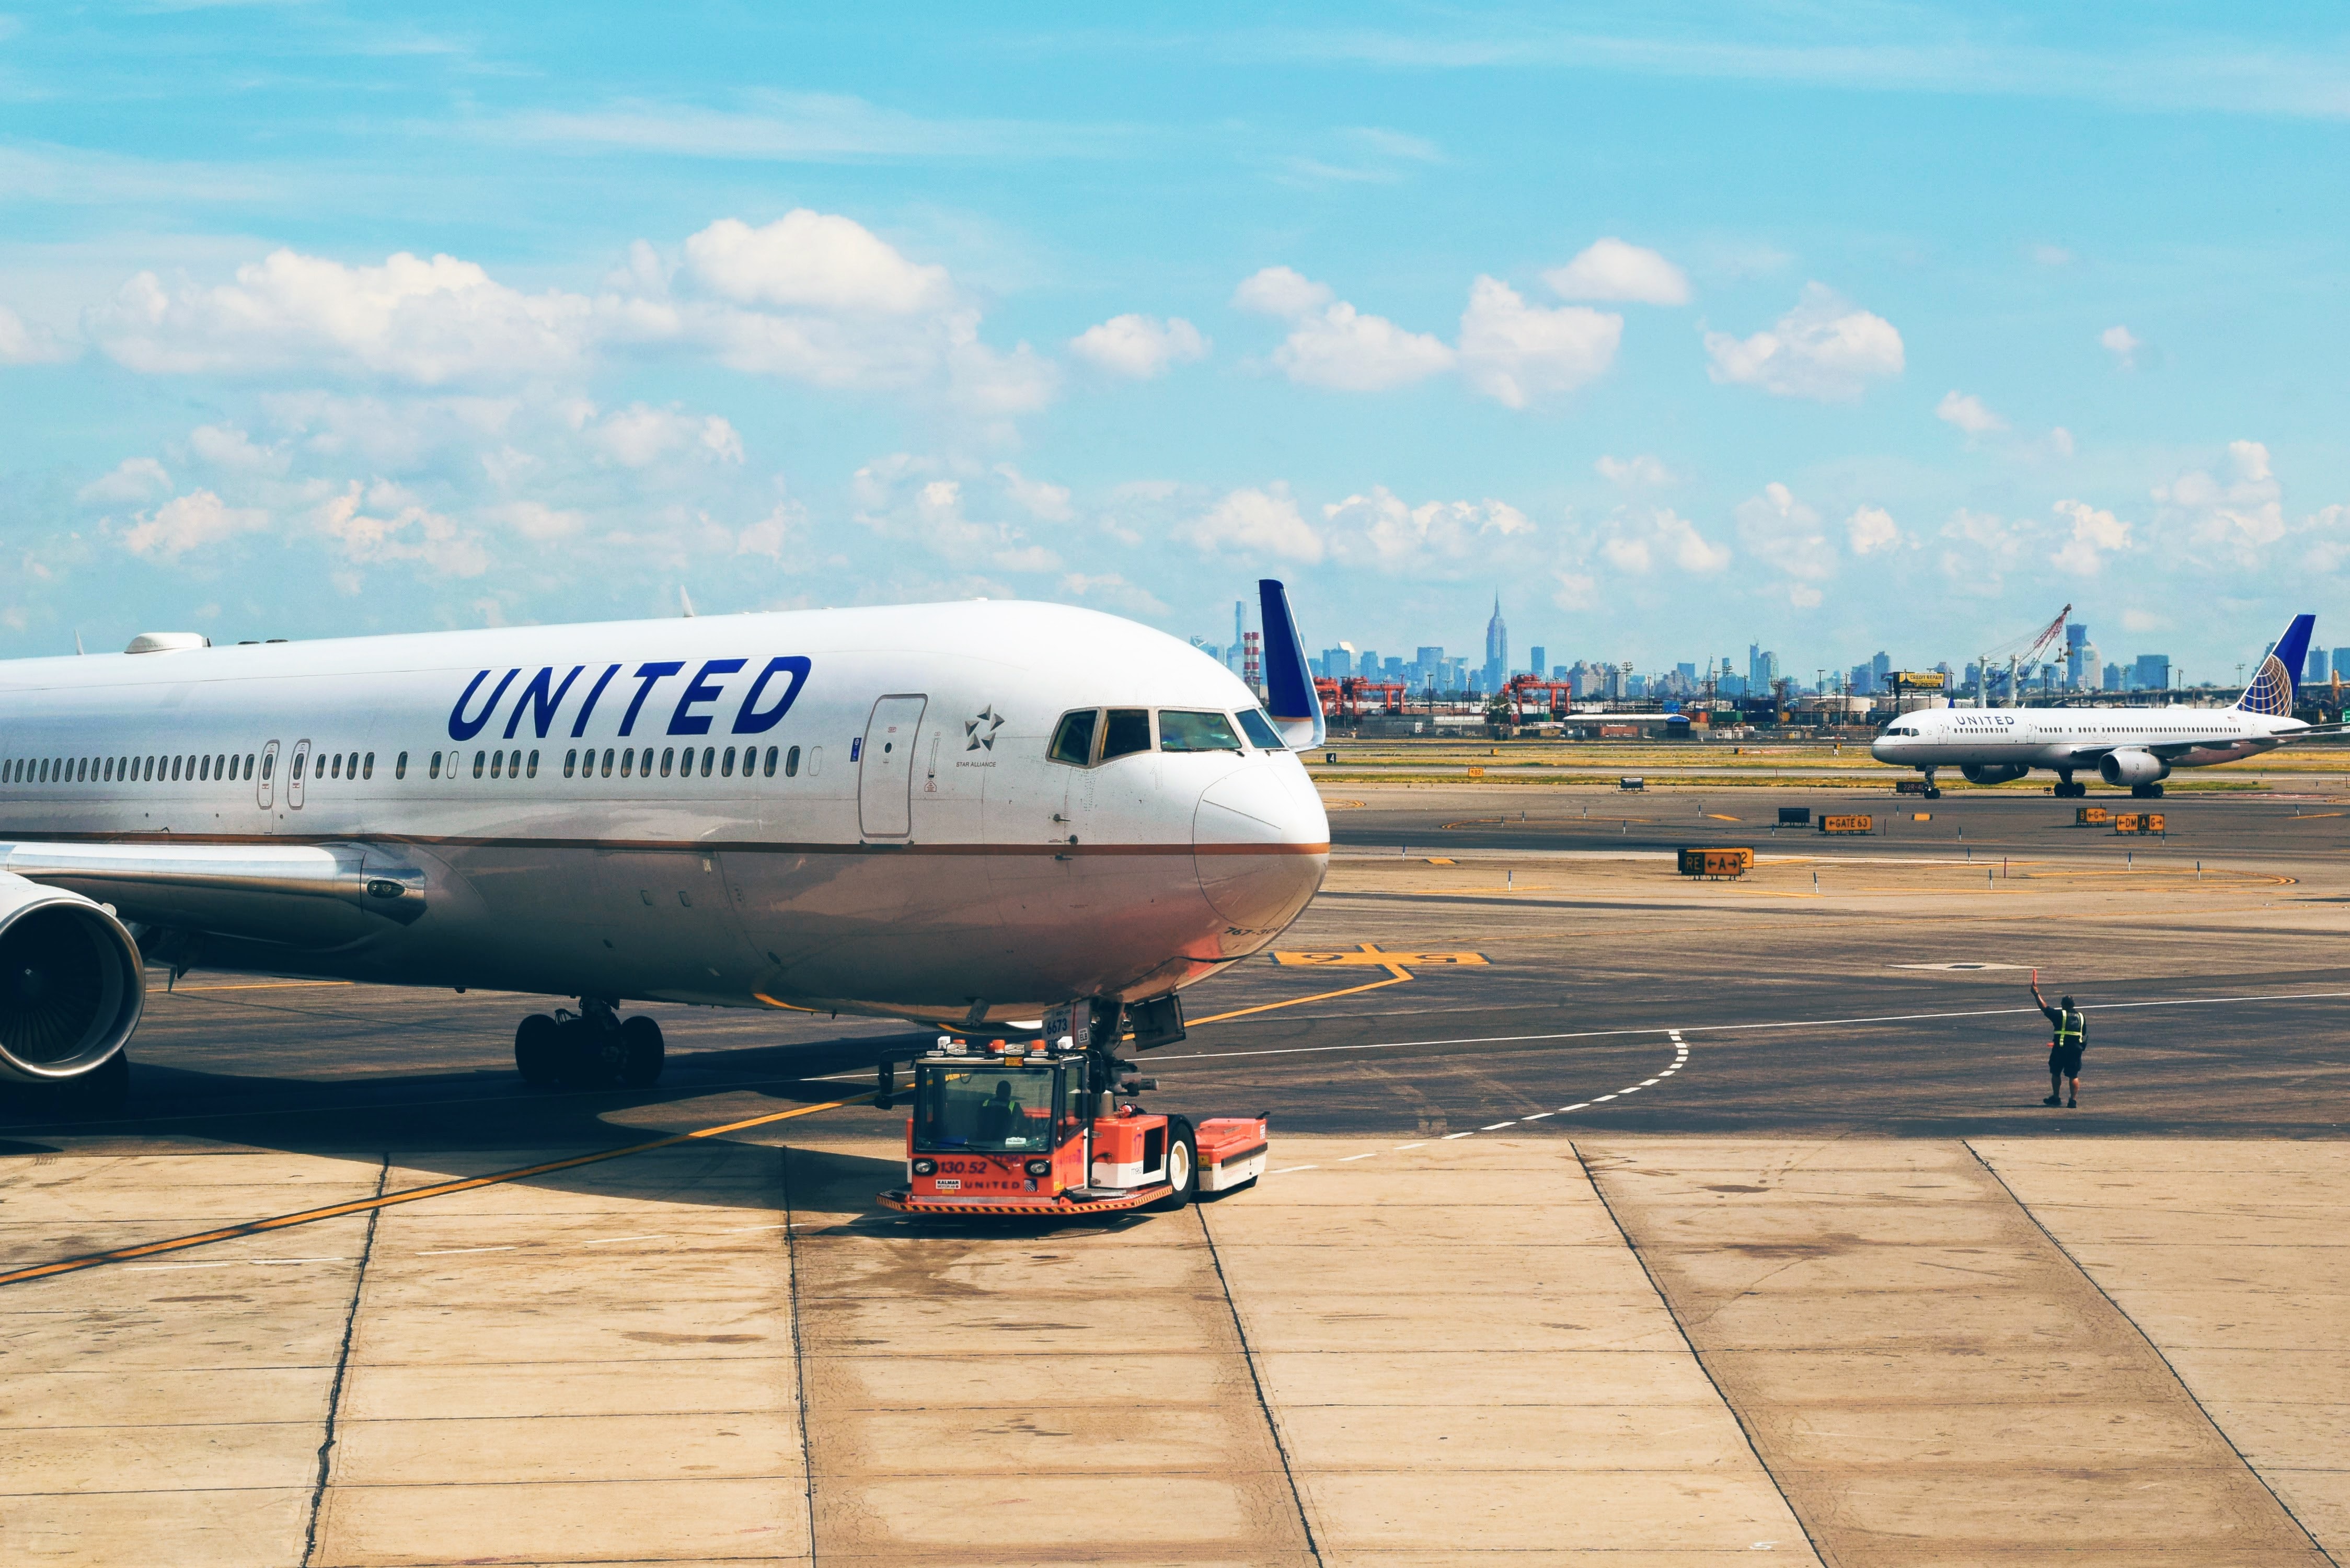 United Airlines adds a new route to Australia as part of its expansion in the region.